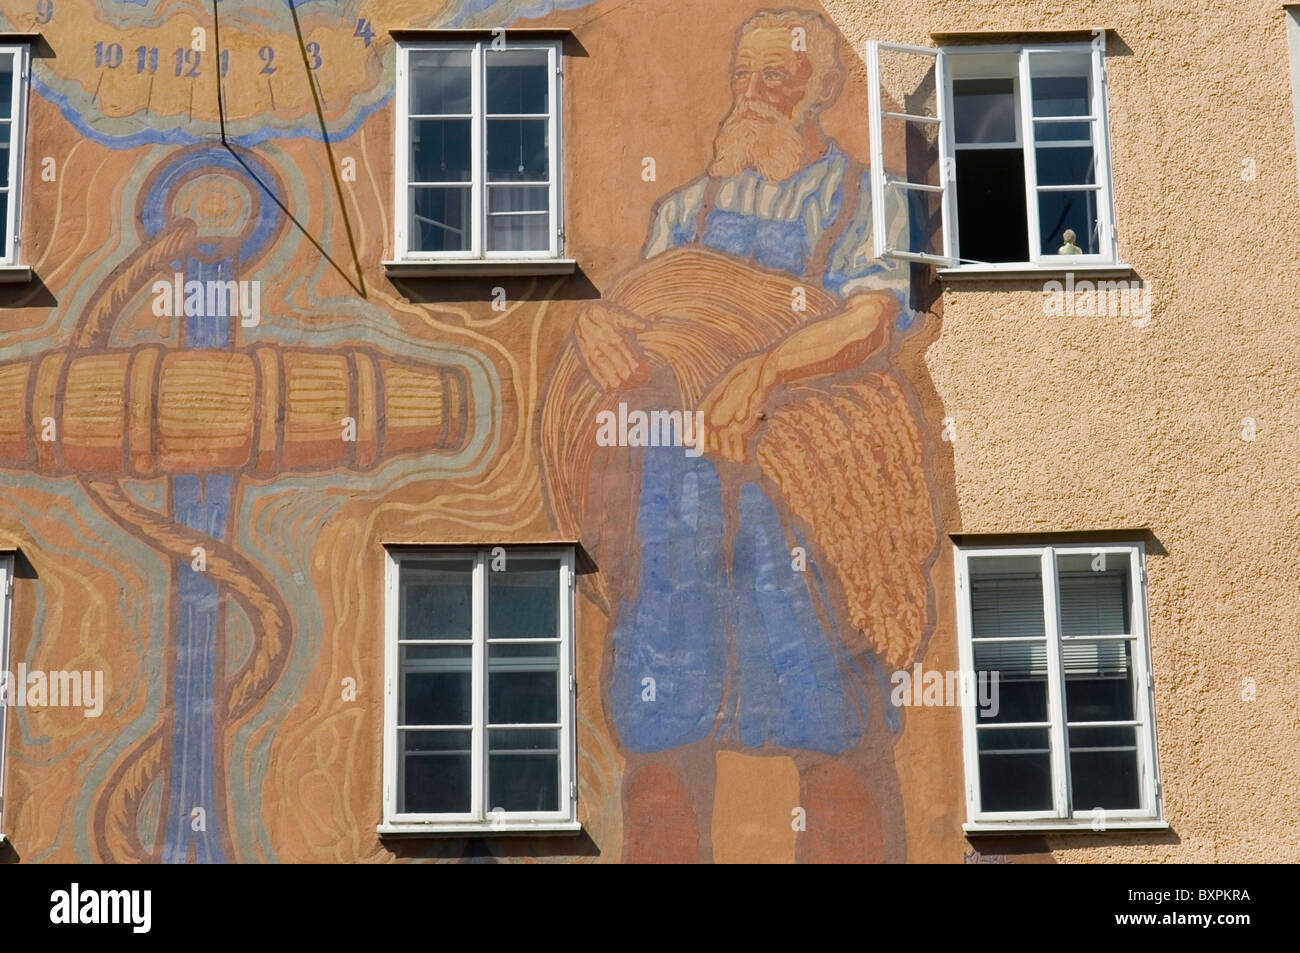 Large Mural Of Rural Life On Building, Close Up Stock Photo